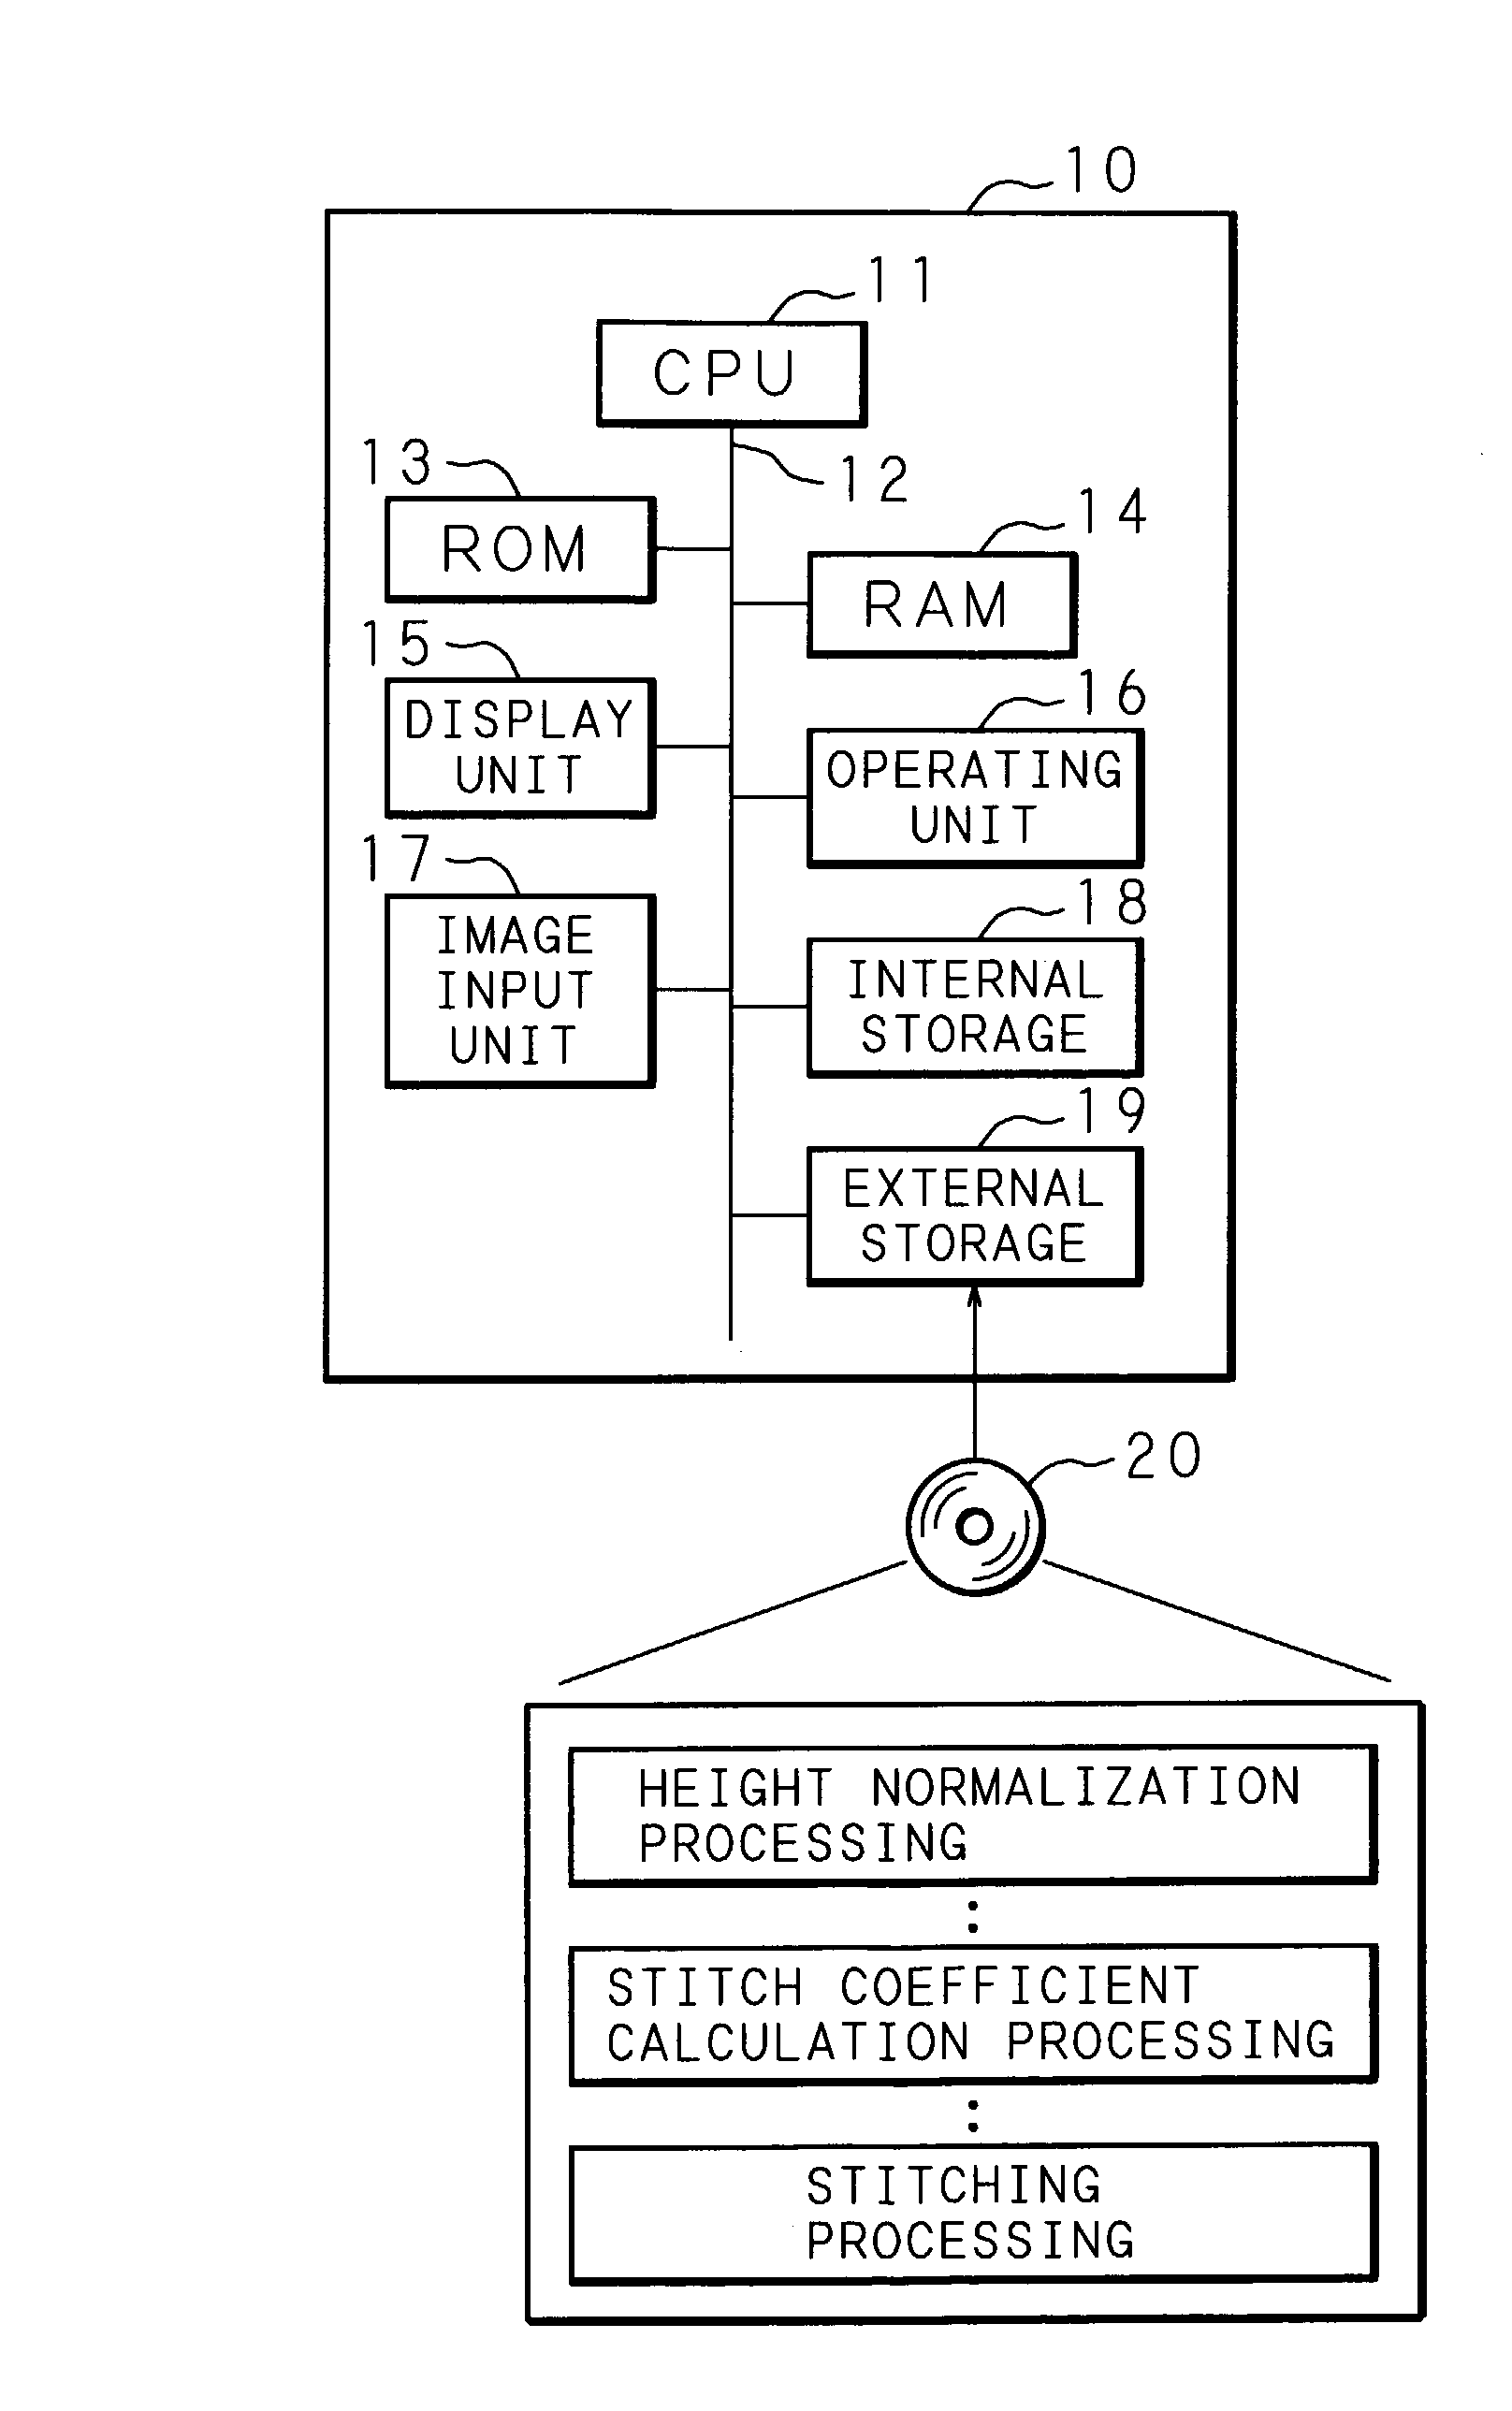 System and method for image processing of multiple images